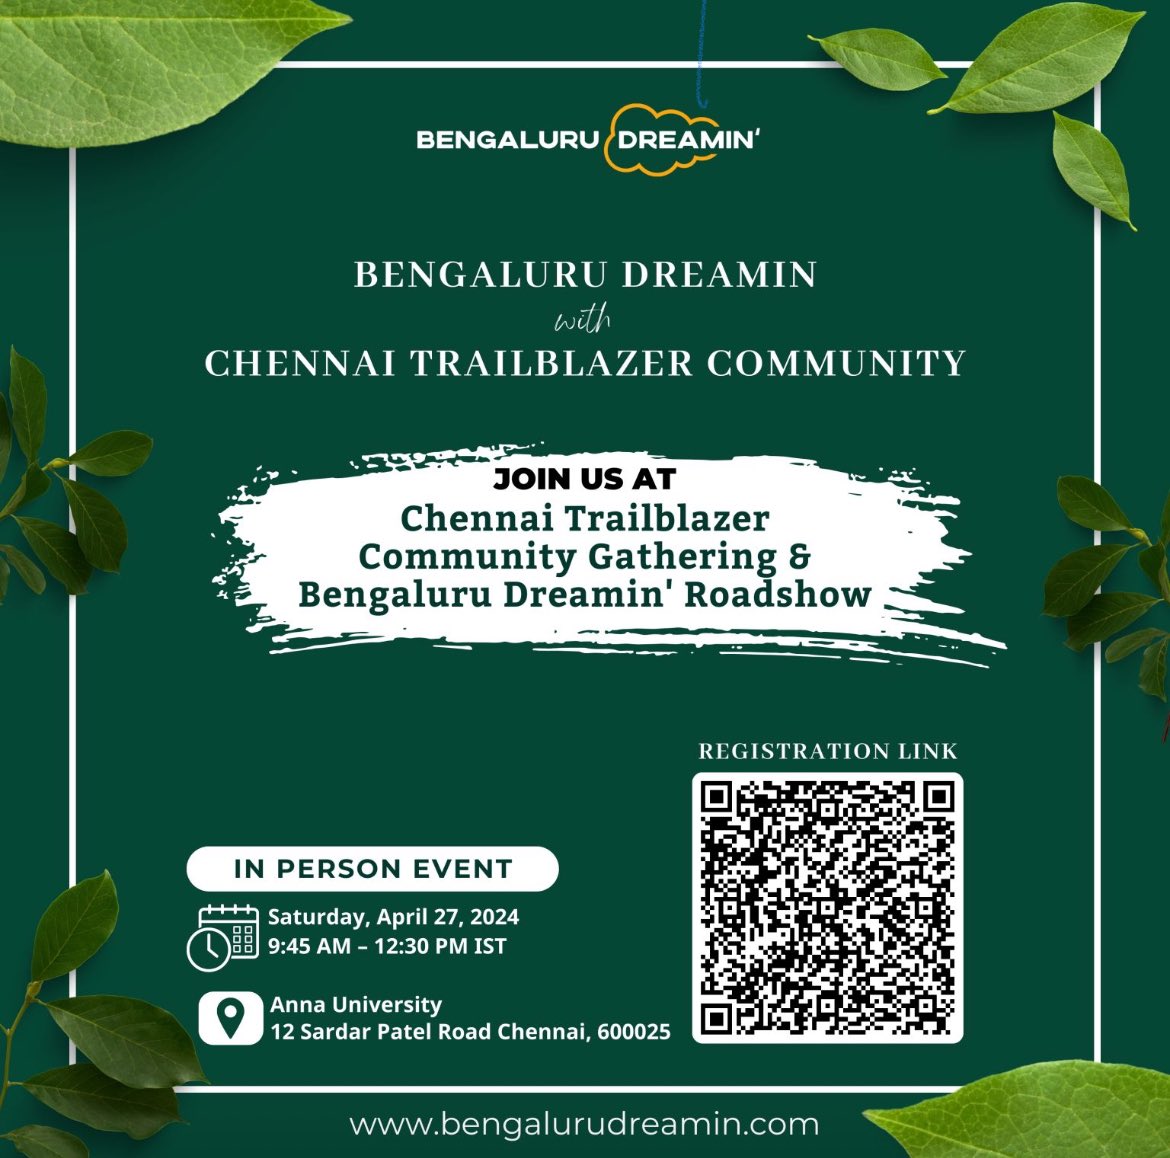 The Bengaluru Dreamin' team is back on its amazing journey of Bengaluru Dreamin' RoadShow

As a part of our RoadShow this Saturday our team will be travelling to Chennai.

𝗥𝗦𝗩𝗣 - lnkd.in/d7-QUBQs

More details👇🏻
linkedin.com/posts/bengalur…

#BengaluruDreamin24 #Salesforce